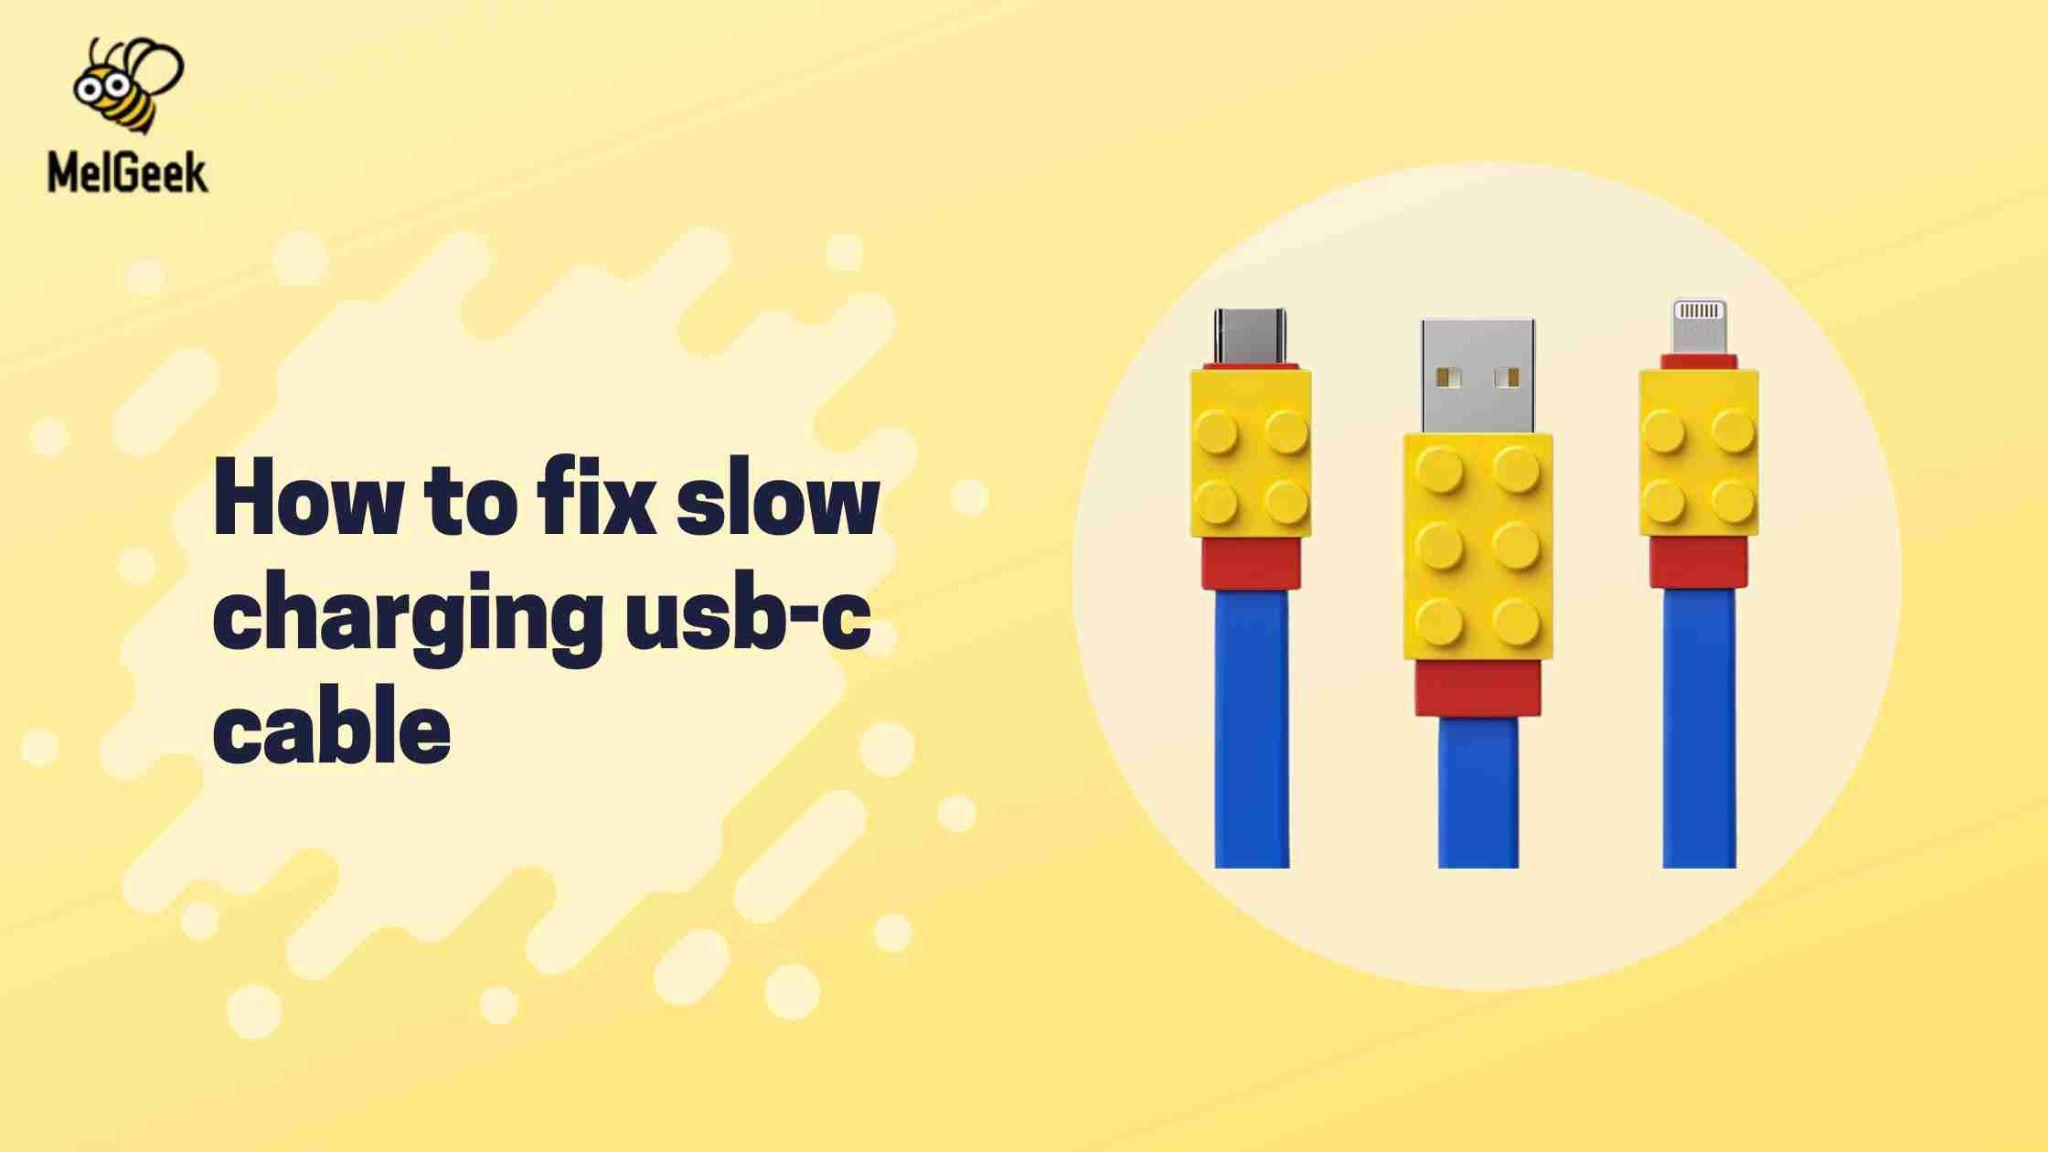 How to fix slow charging usb-c cable